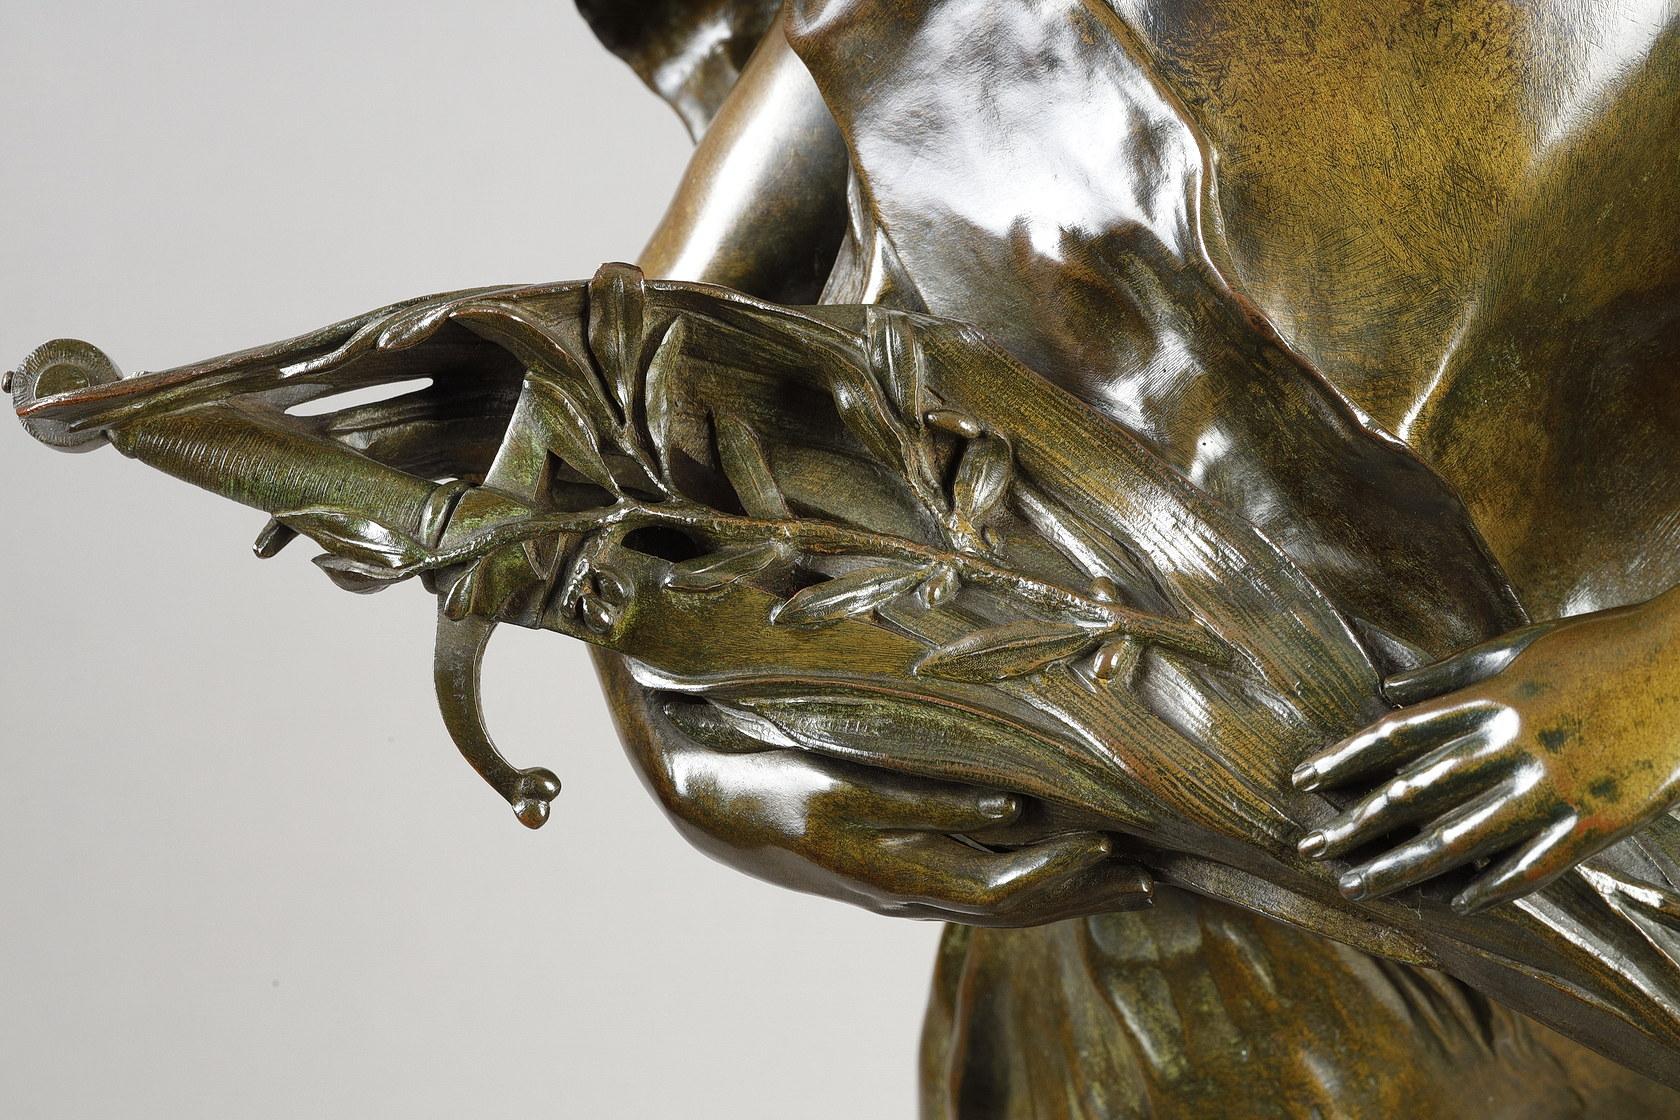 Winged Victory - Gold Figurative Sculpture by François Sicard